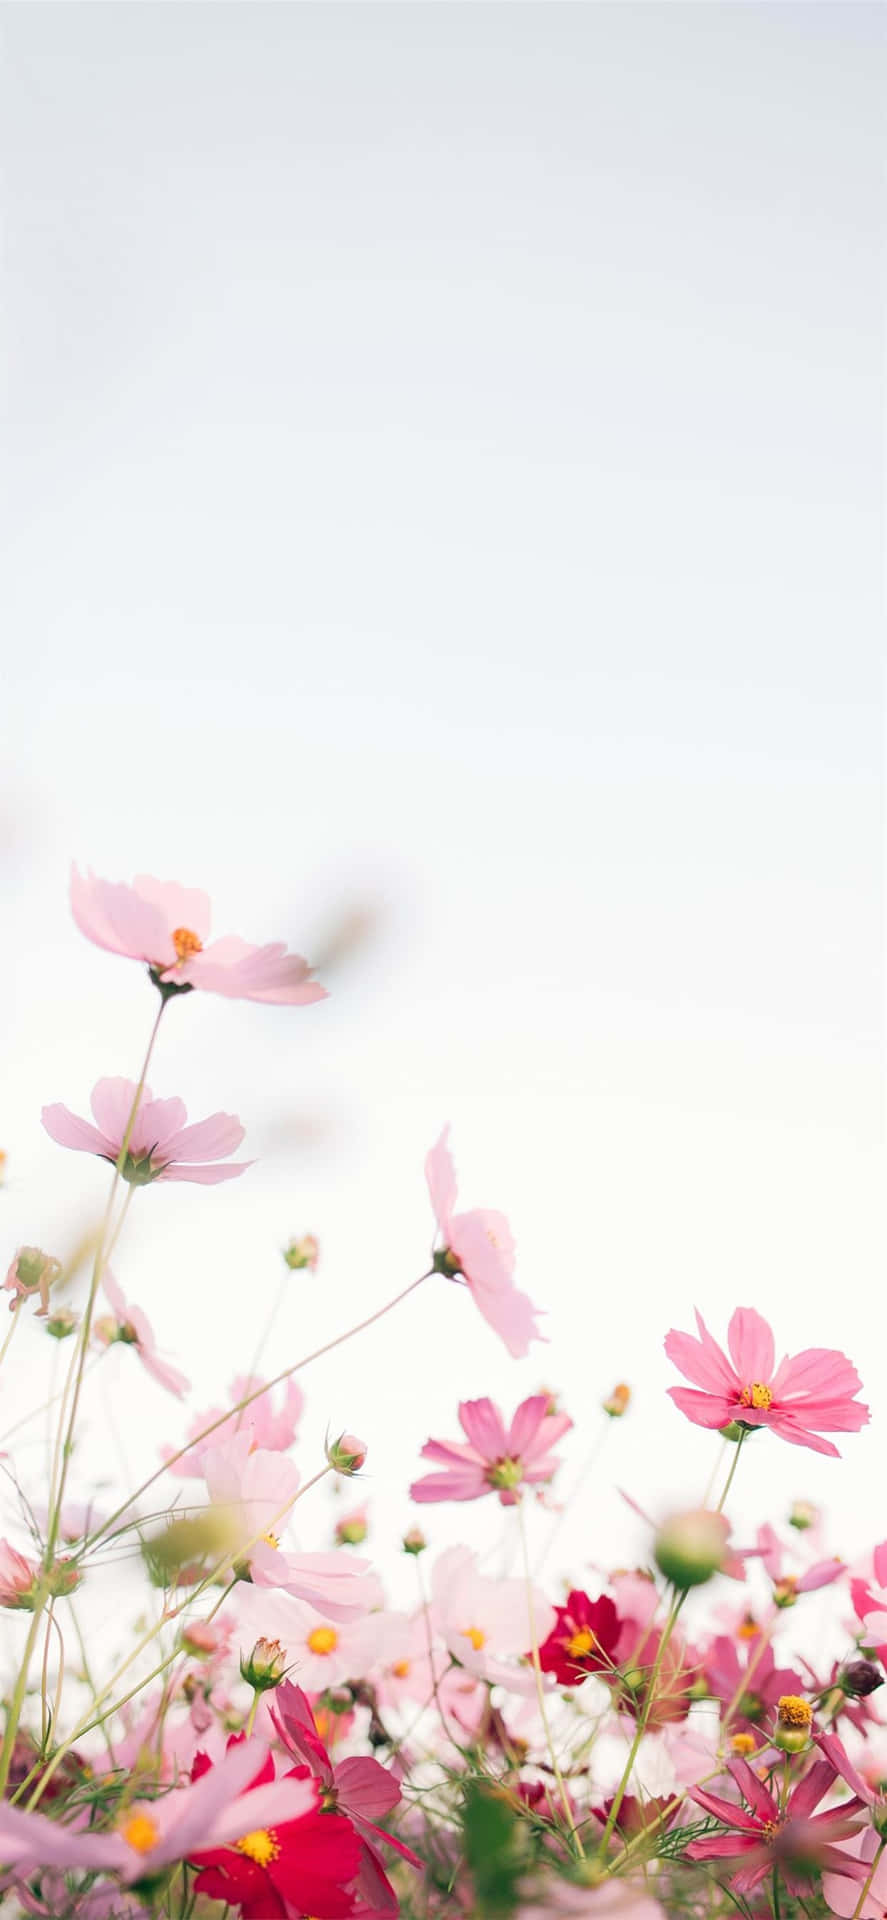 A beautiful pink flower against a white background